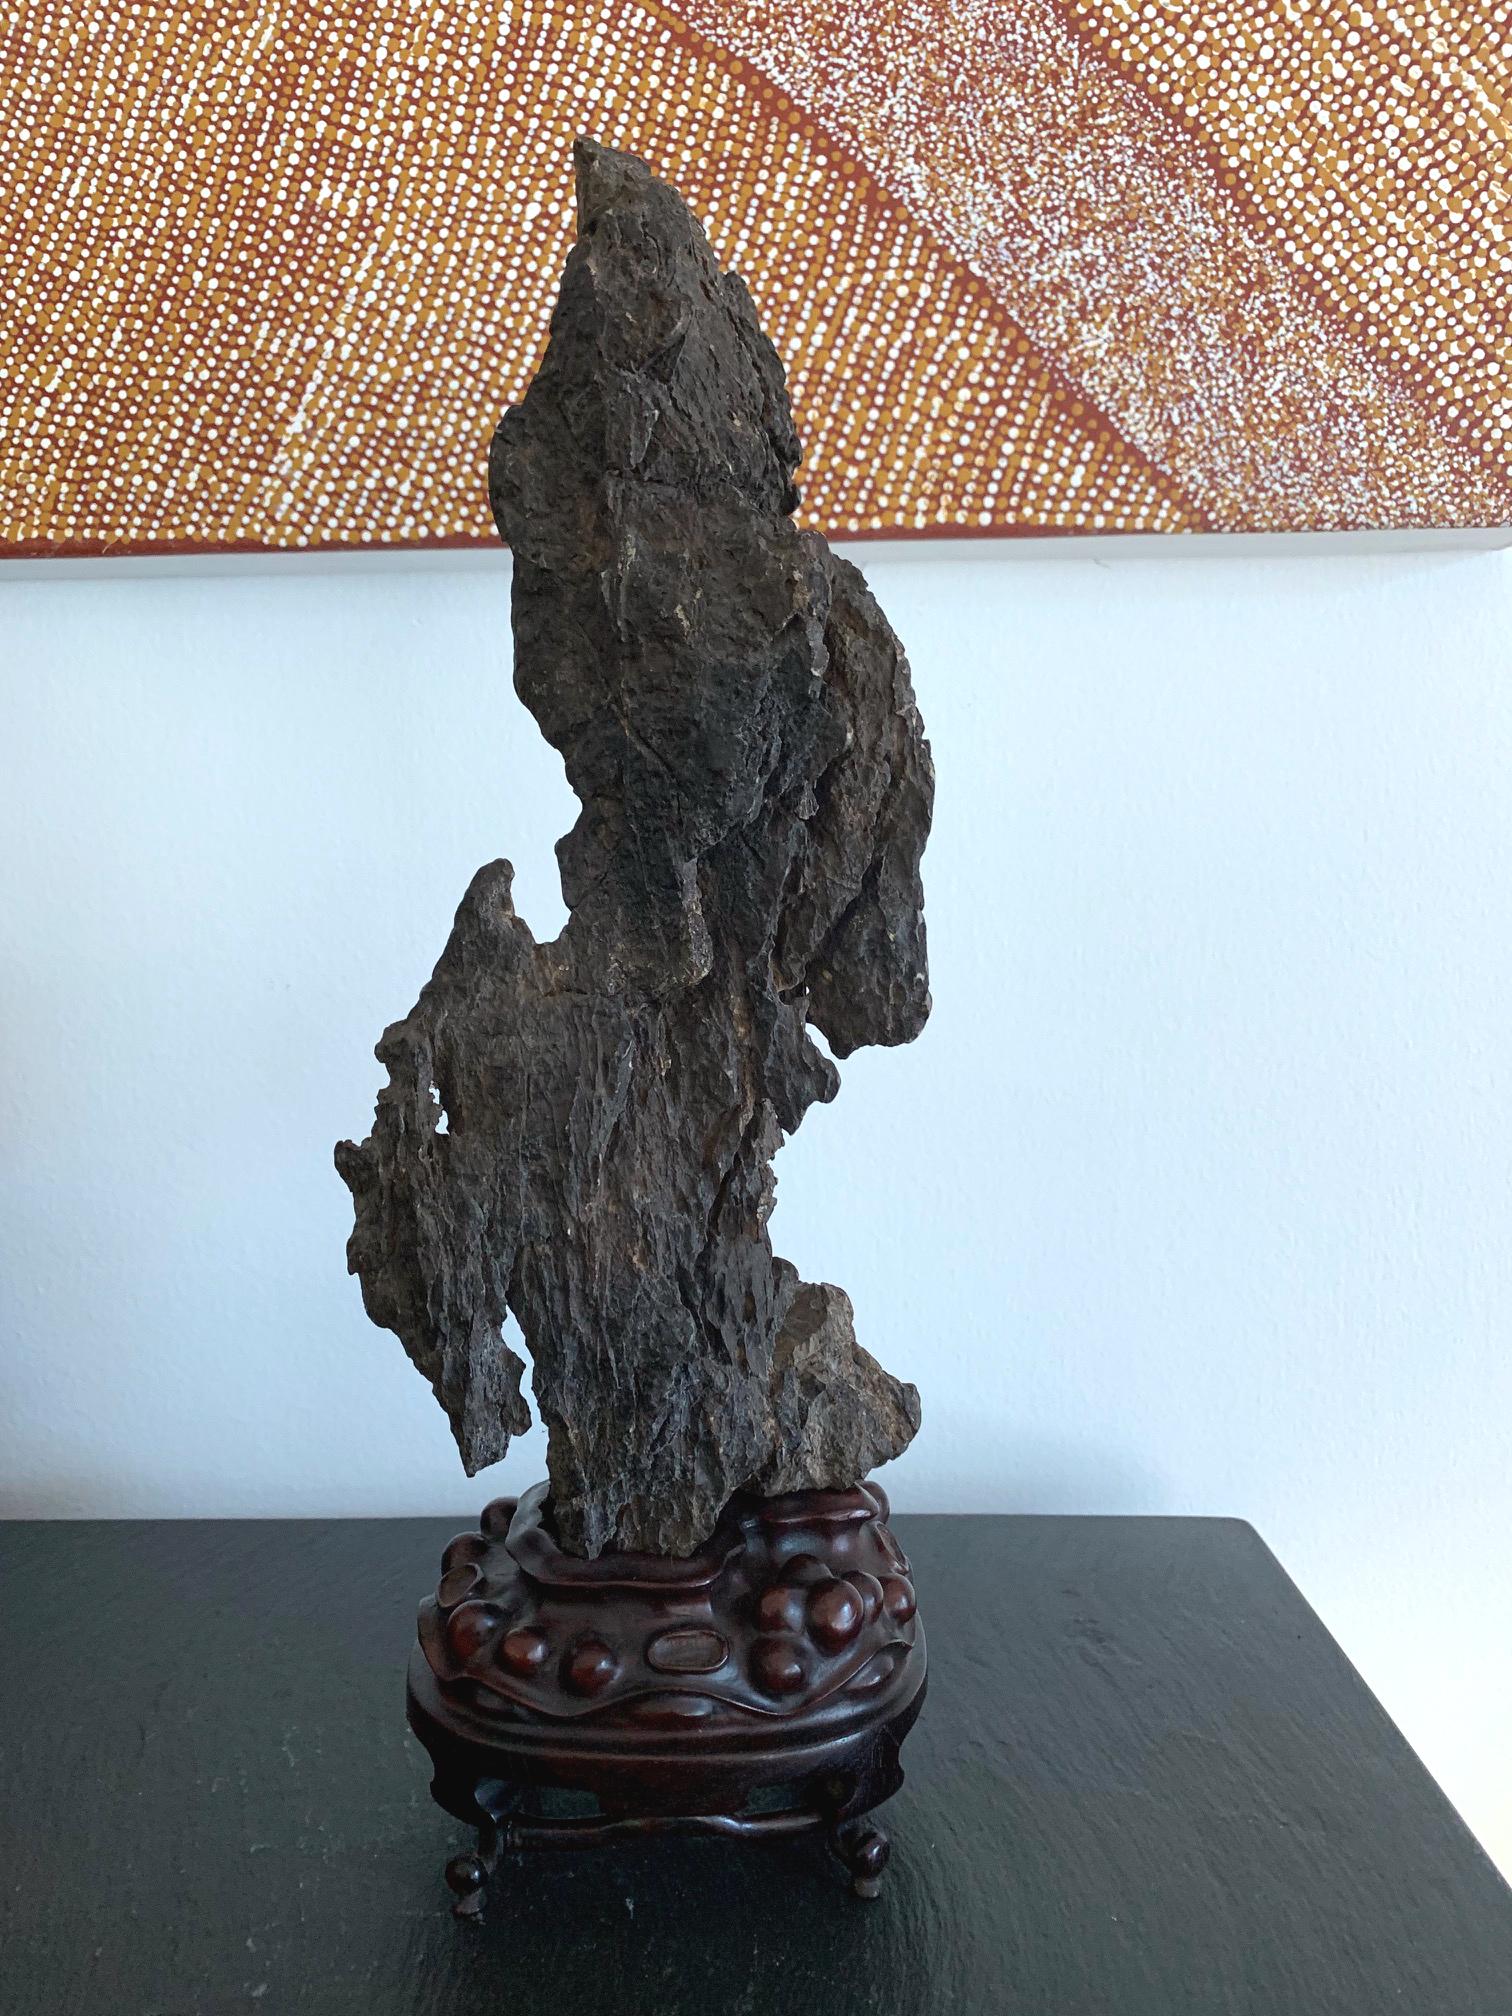 Yingde stone was harvested from from Guangdong province in Southern China, one of the four famous types of Chinese scholar stone (also known as Gongshi, meditation stone or spirited stone). Yingde stone is priced for its wrinkled sculptural form